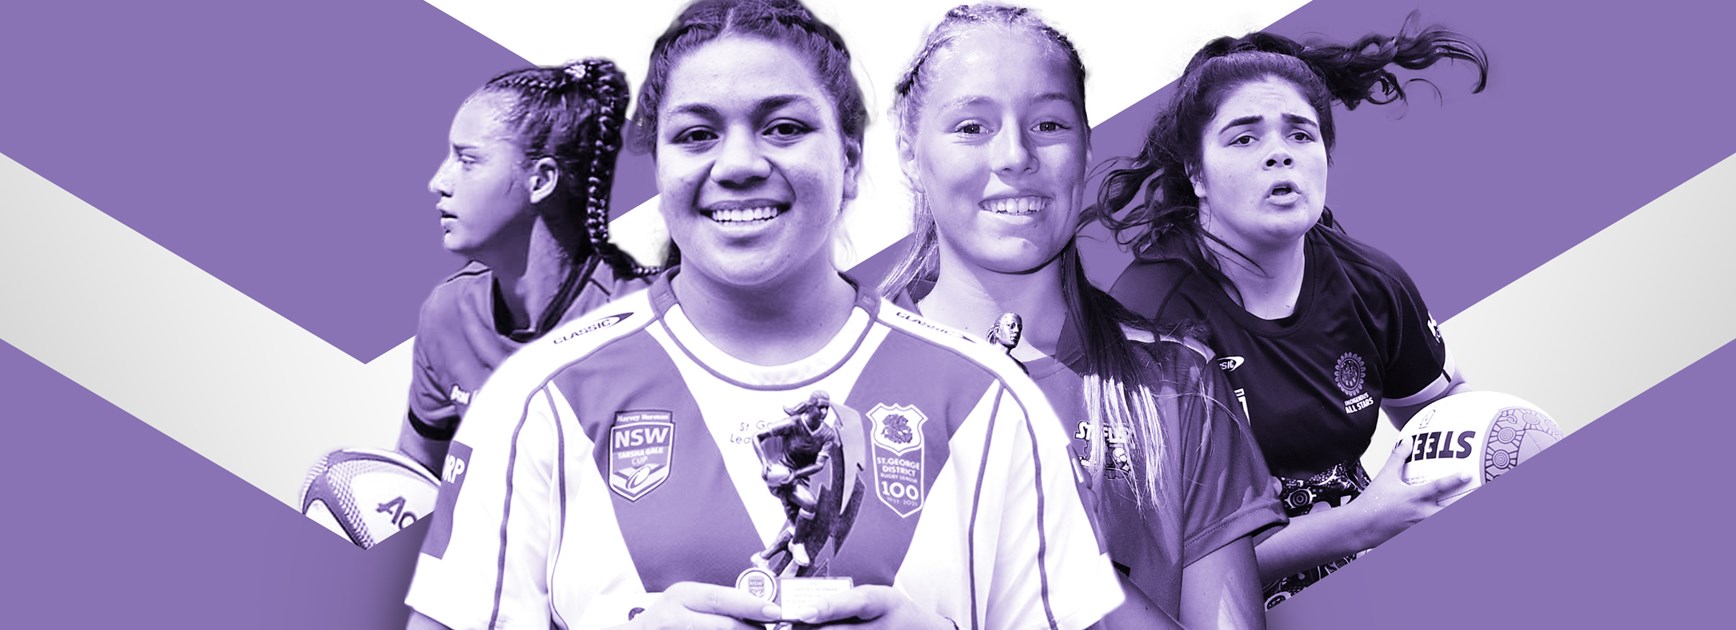 Harvey Norman National Championships: 14 players to watch